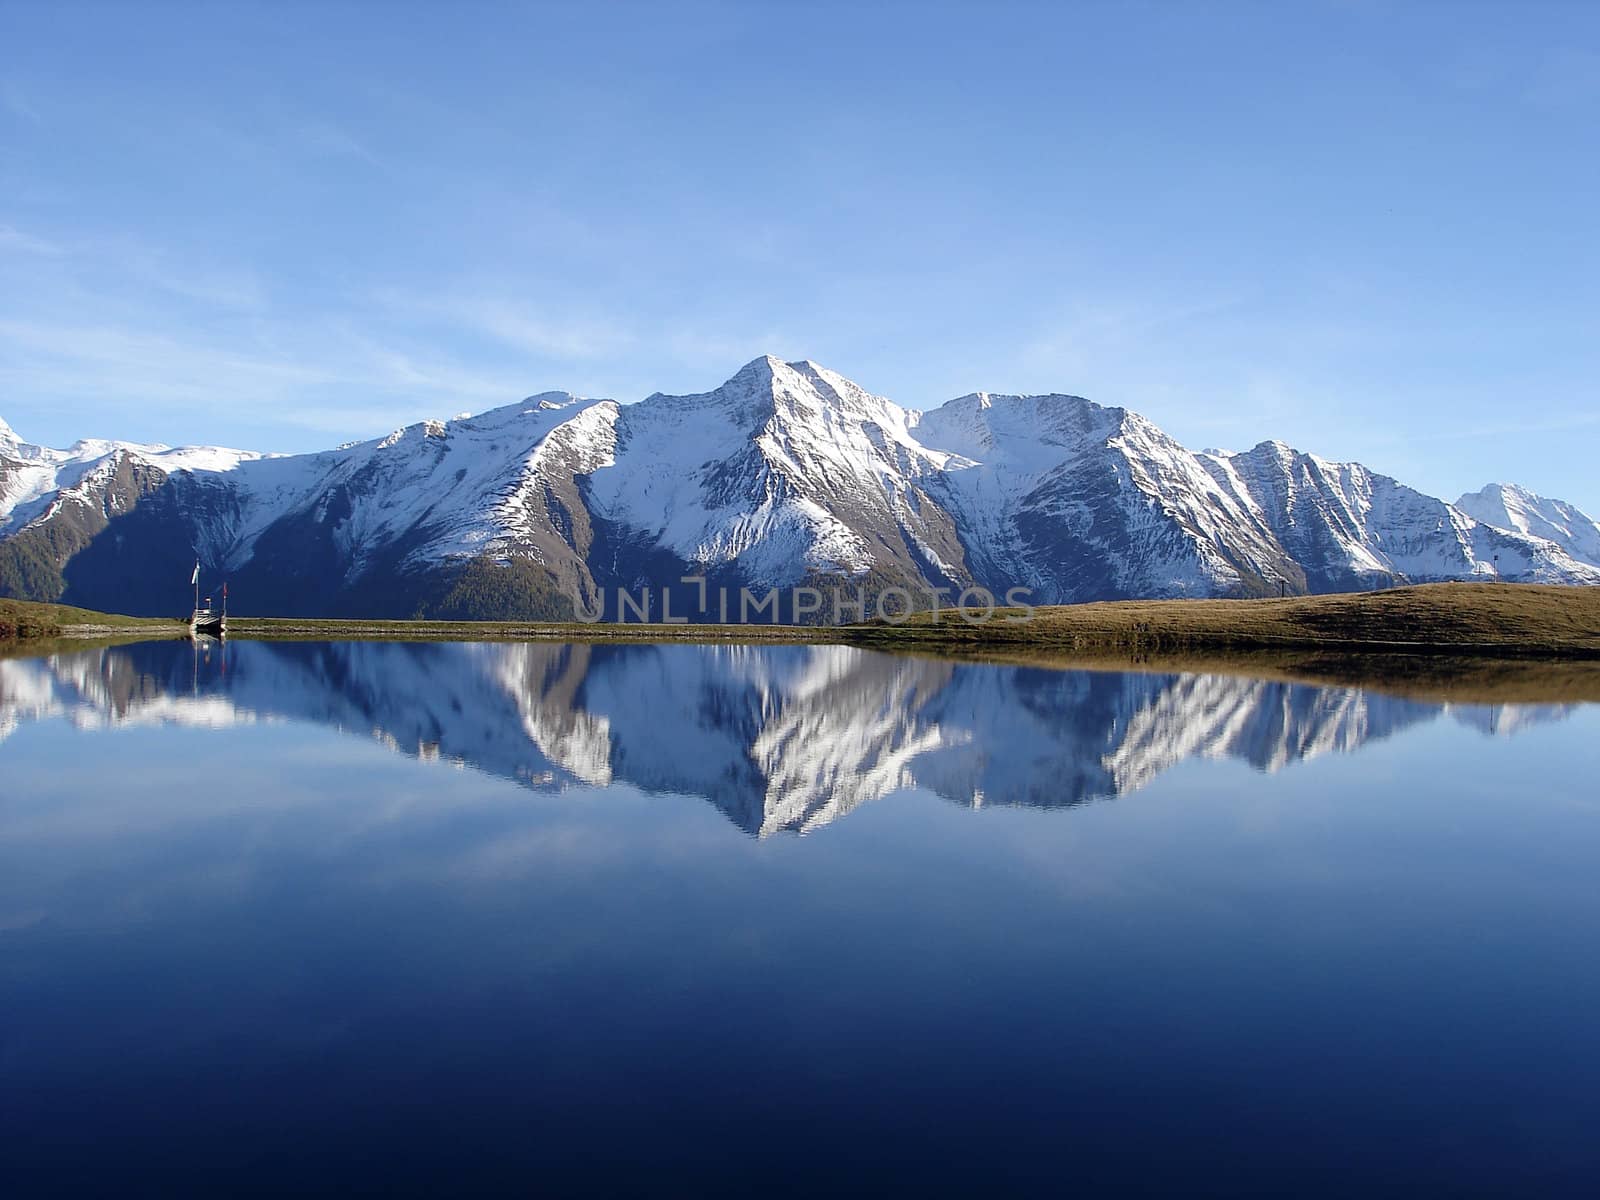 Snowcapped Mountain Reflection In The Water Of Bettmersee Lake Aletsch Region Valais Canton.